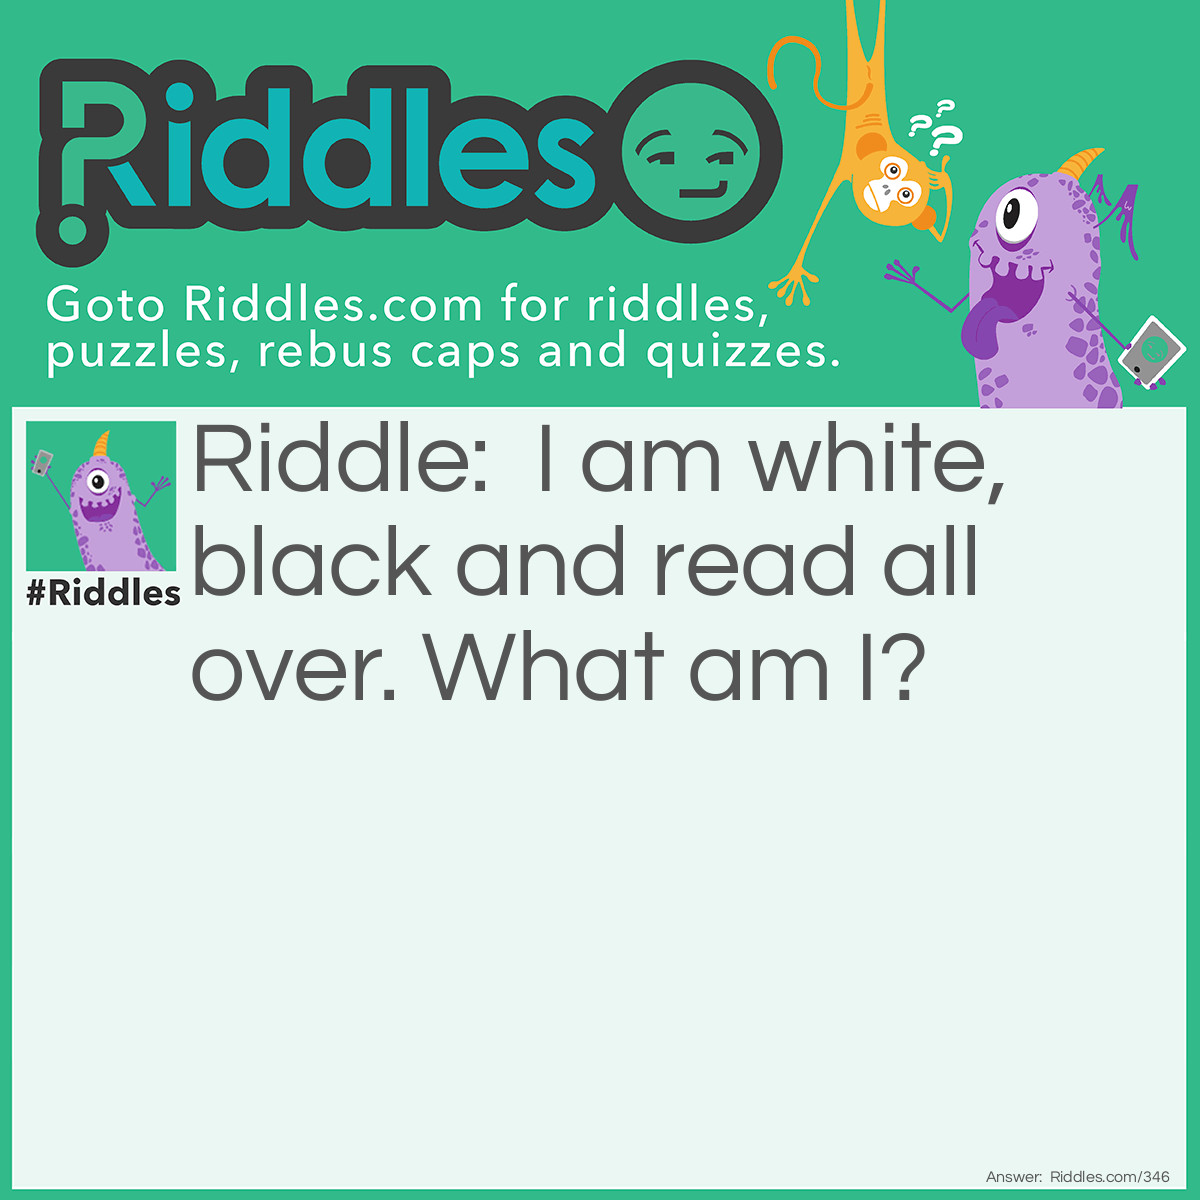 Riddle: I am white, black and read all over. What am I? Answer: Newspaper!